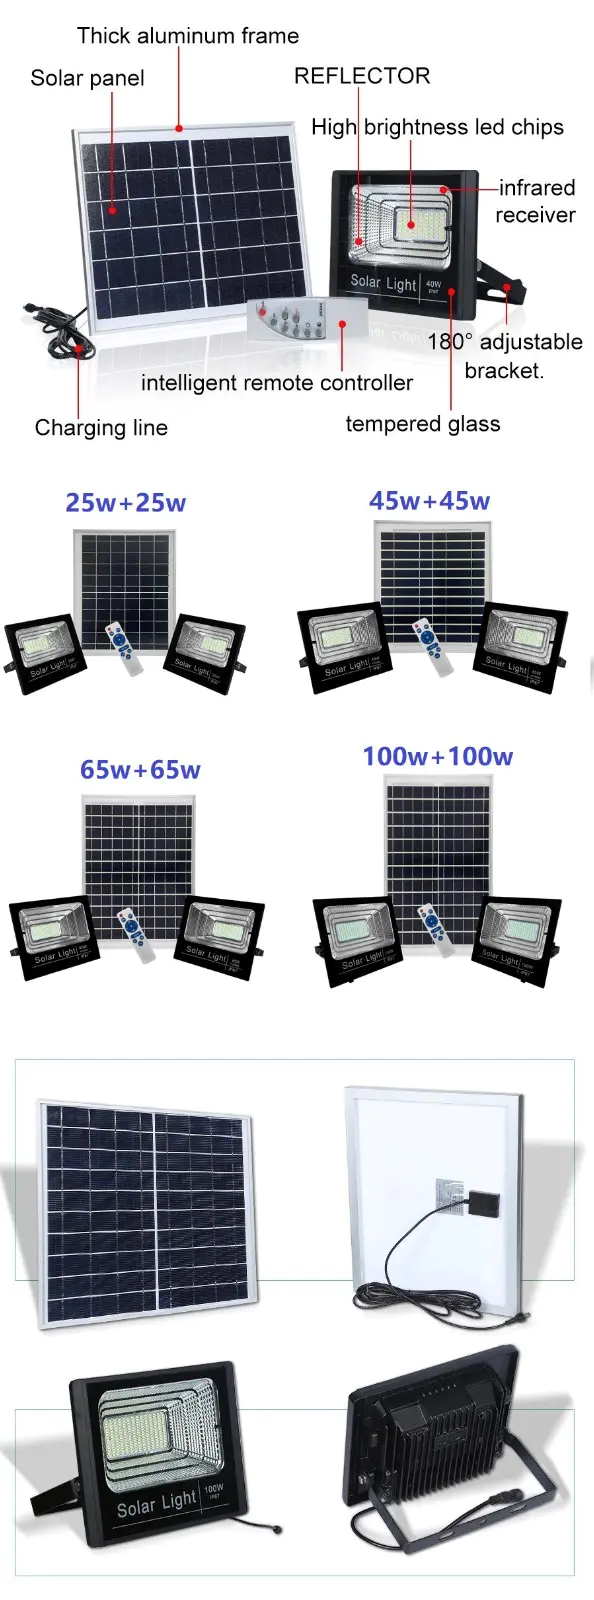 Litel Technology hot-sale best outdoor solar flood lights inquire now for warehouse